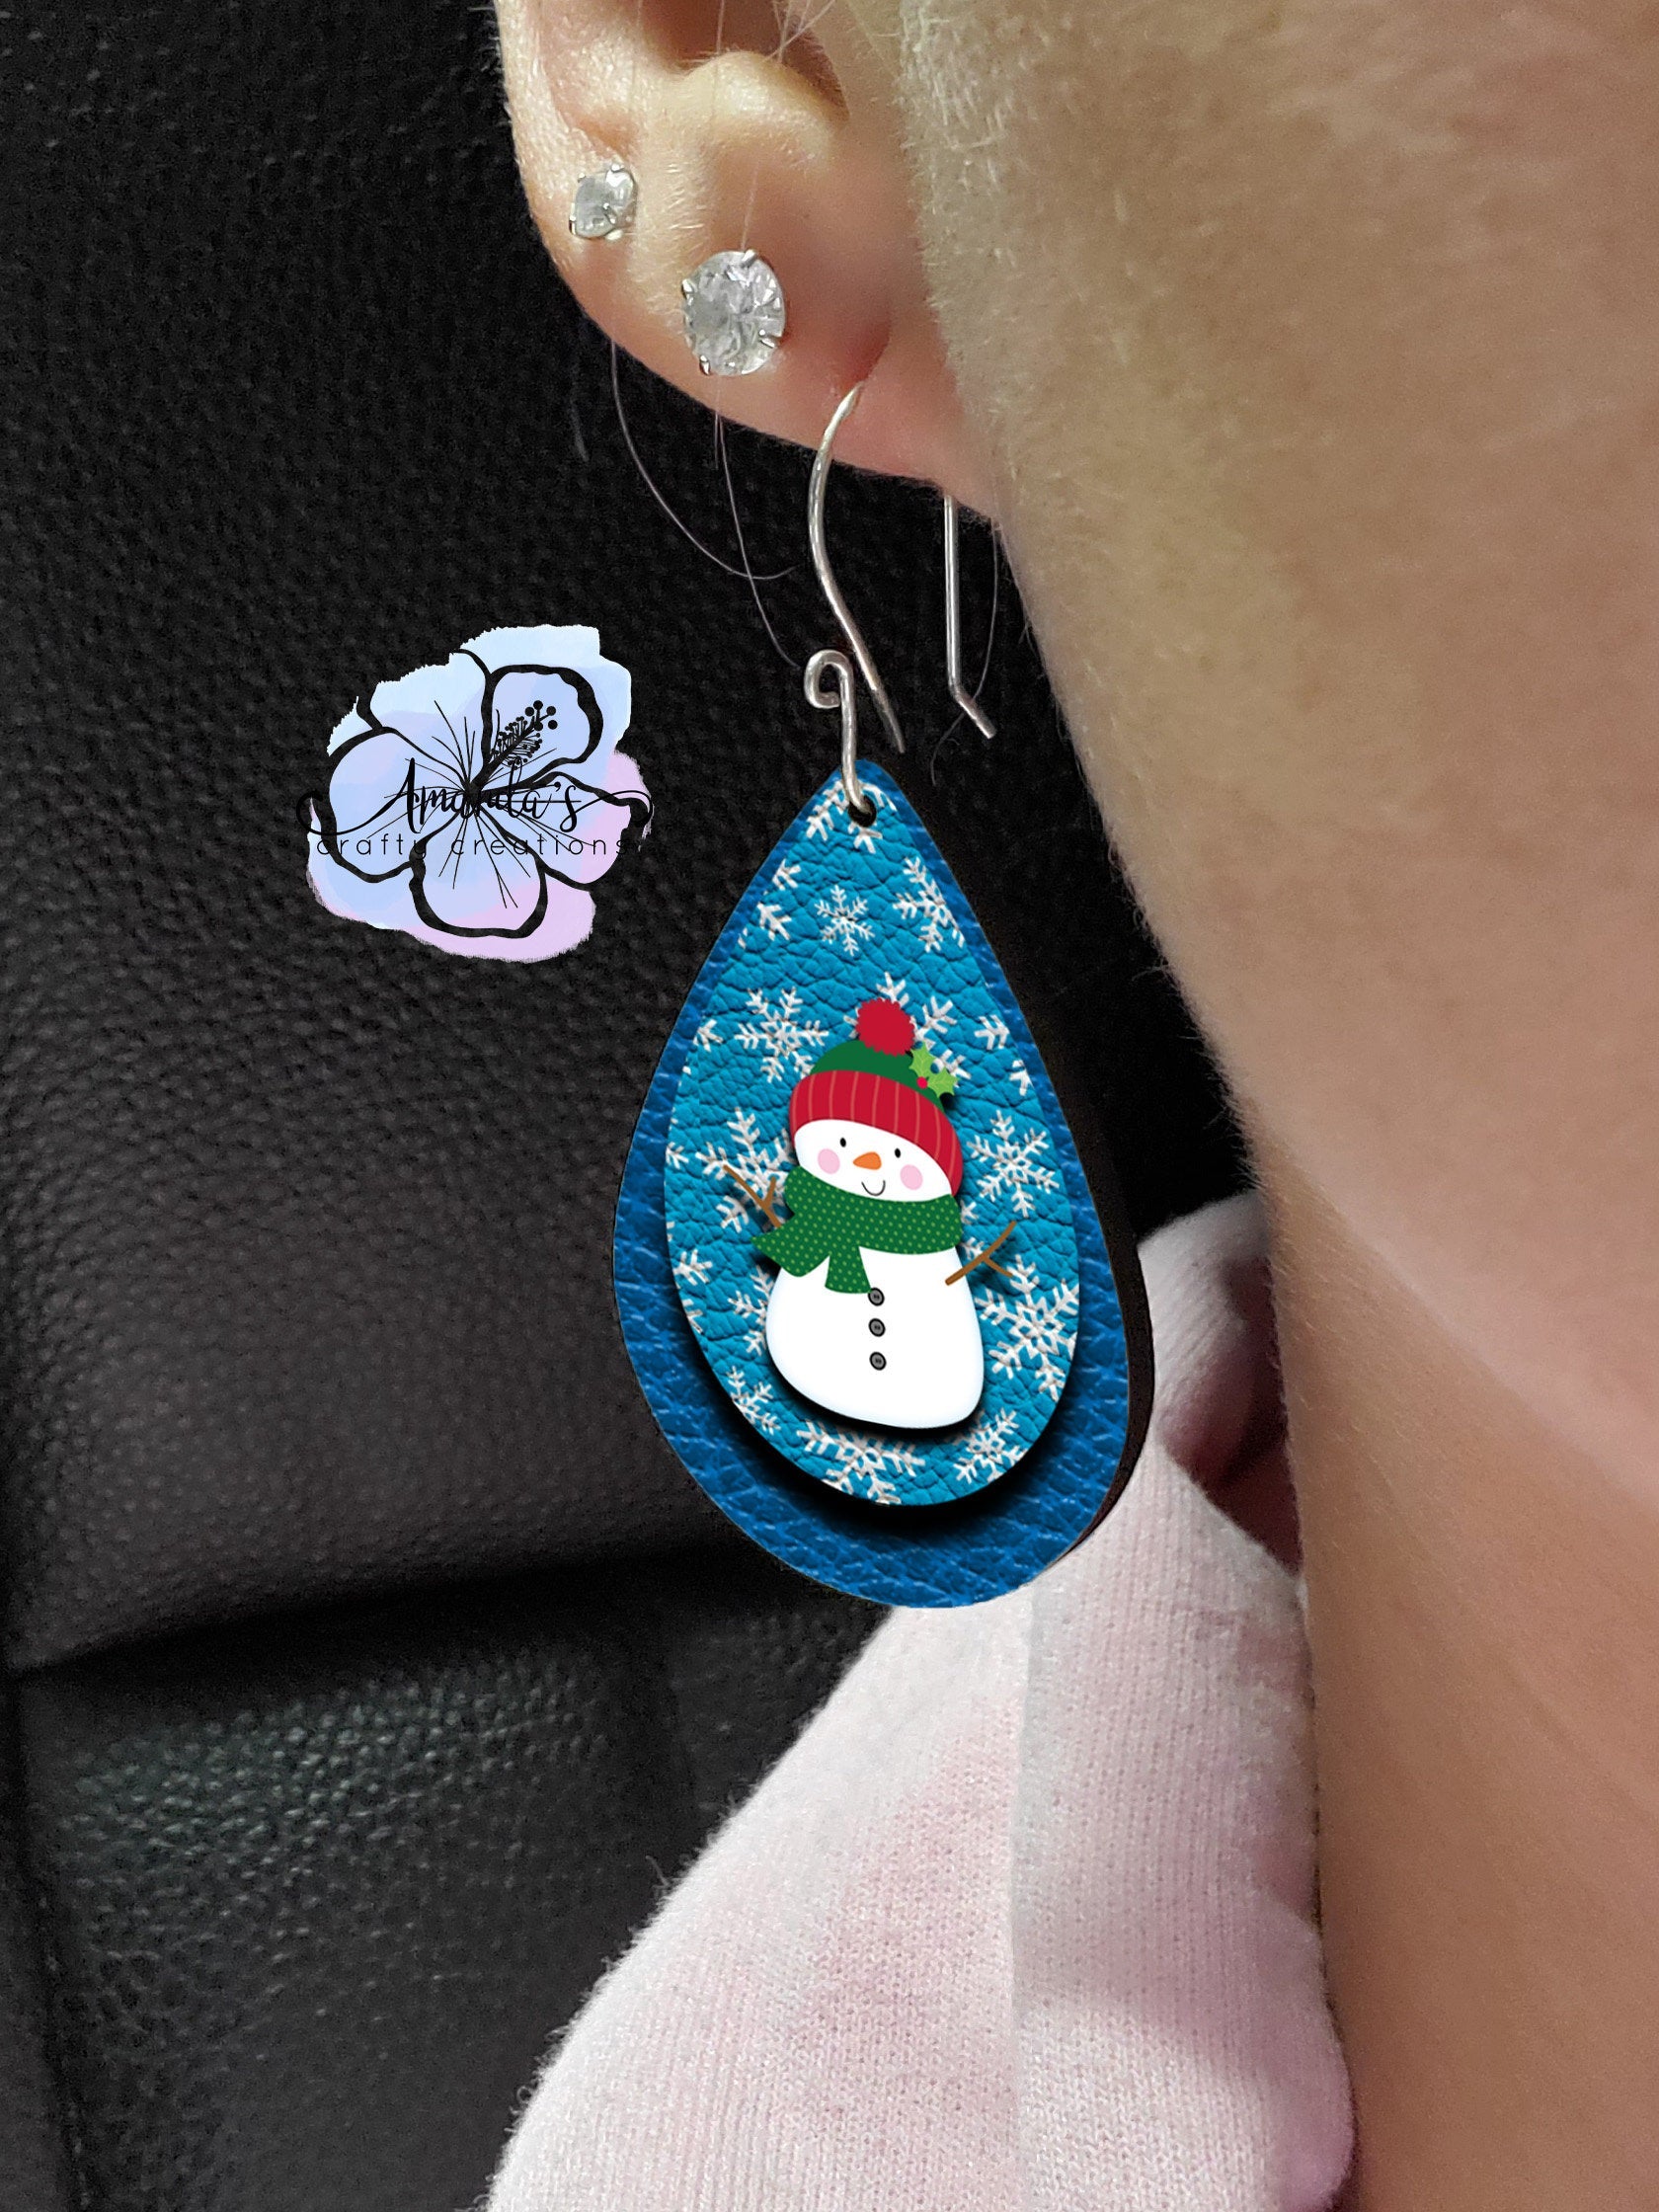 Drop Earrings, blue snowflakes with snowman